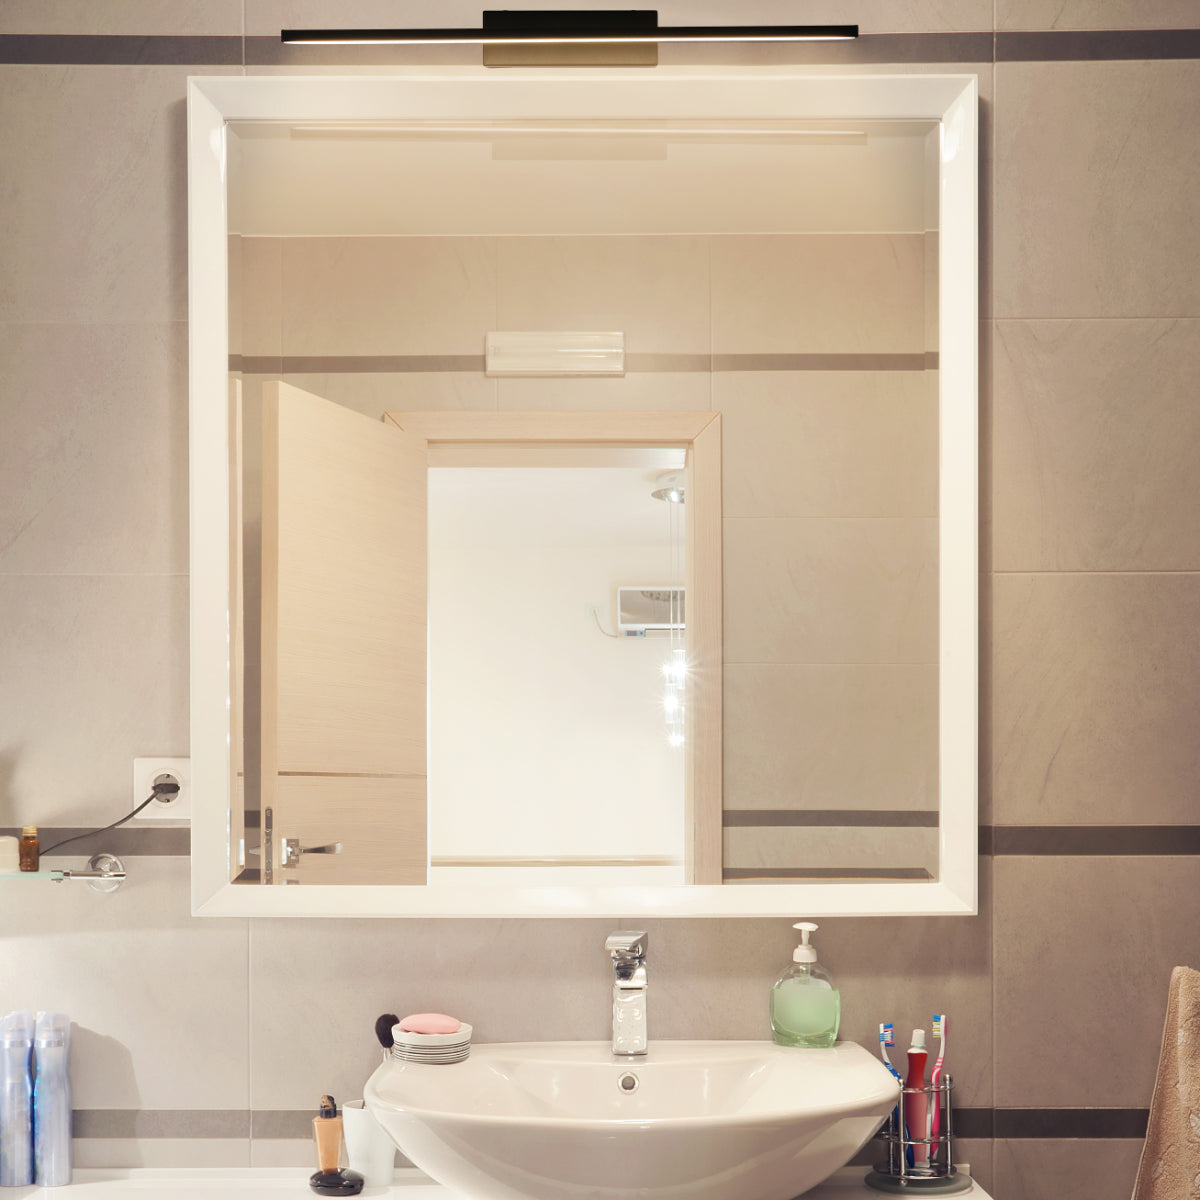 Where to use Contemporary LED Light for Picture Frames & Bathroom Sanity Mirrors - 50cm 117-032697